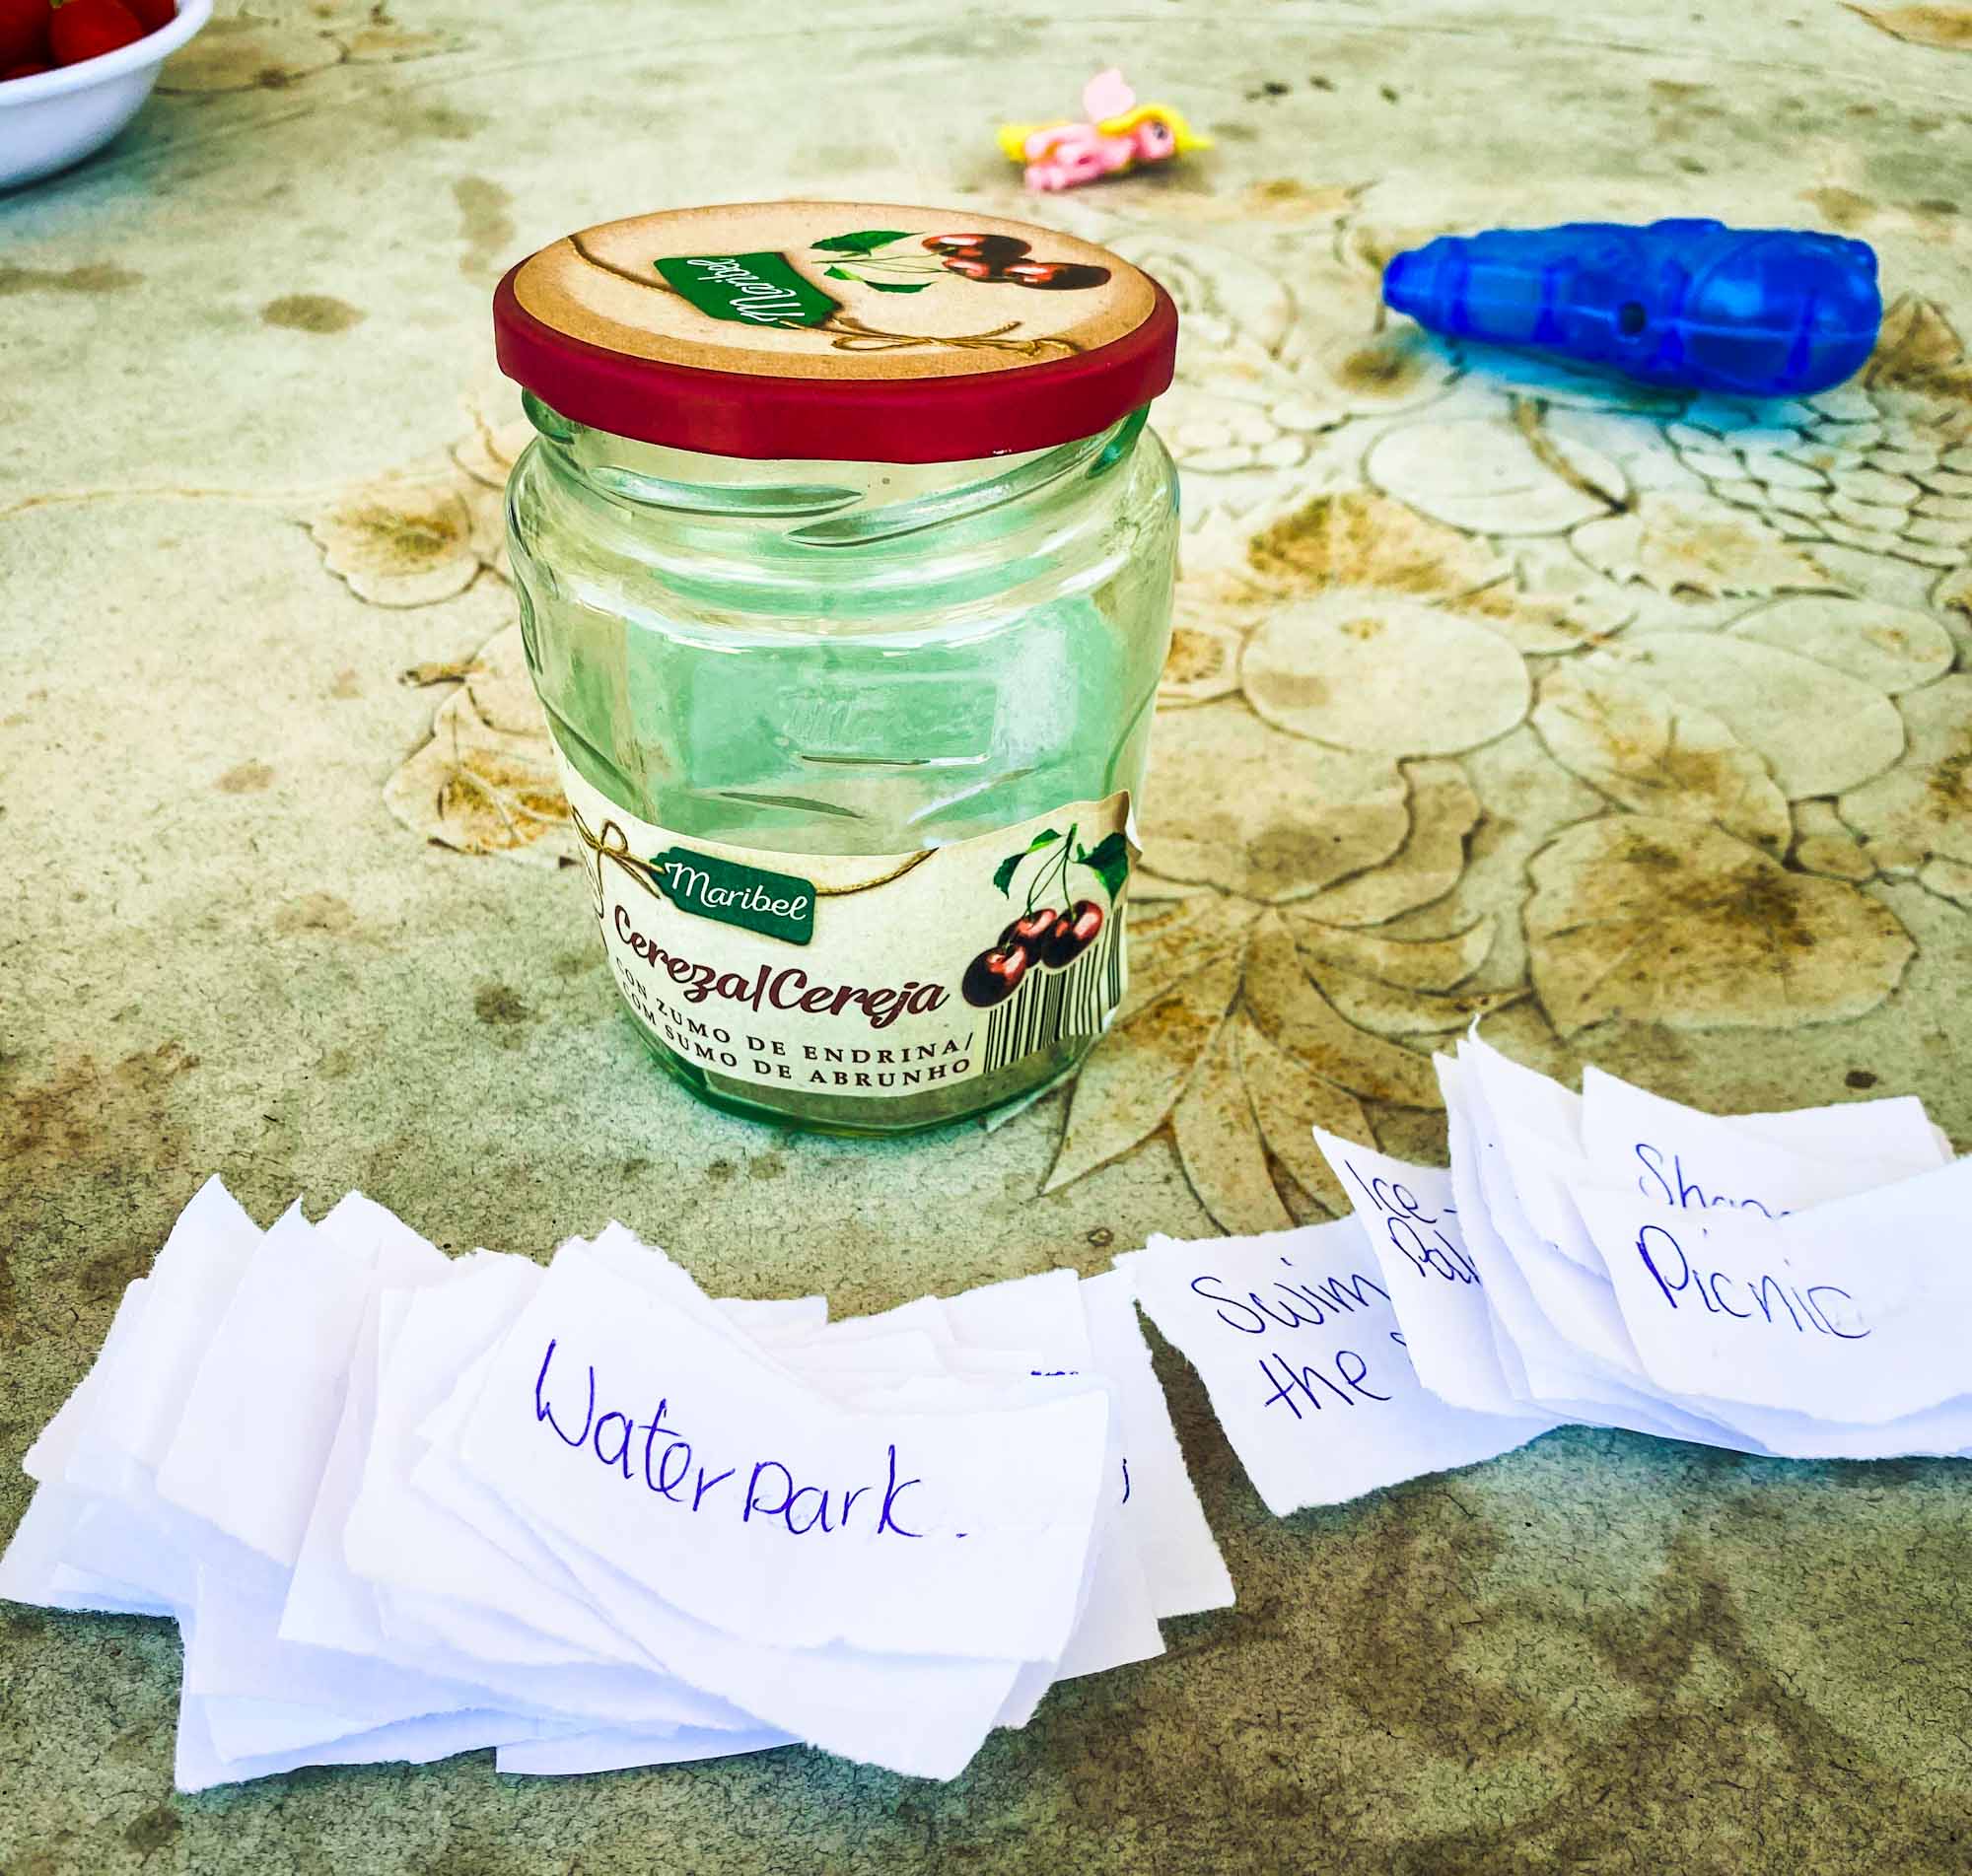 Empty jam jar being used to store pieces of paper with different children's activities written on them